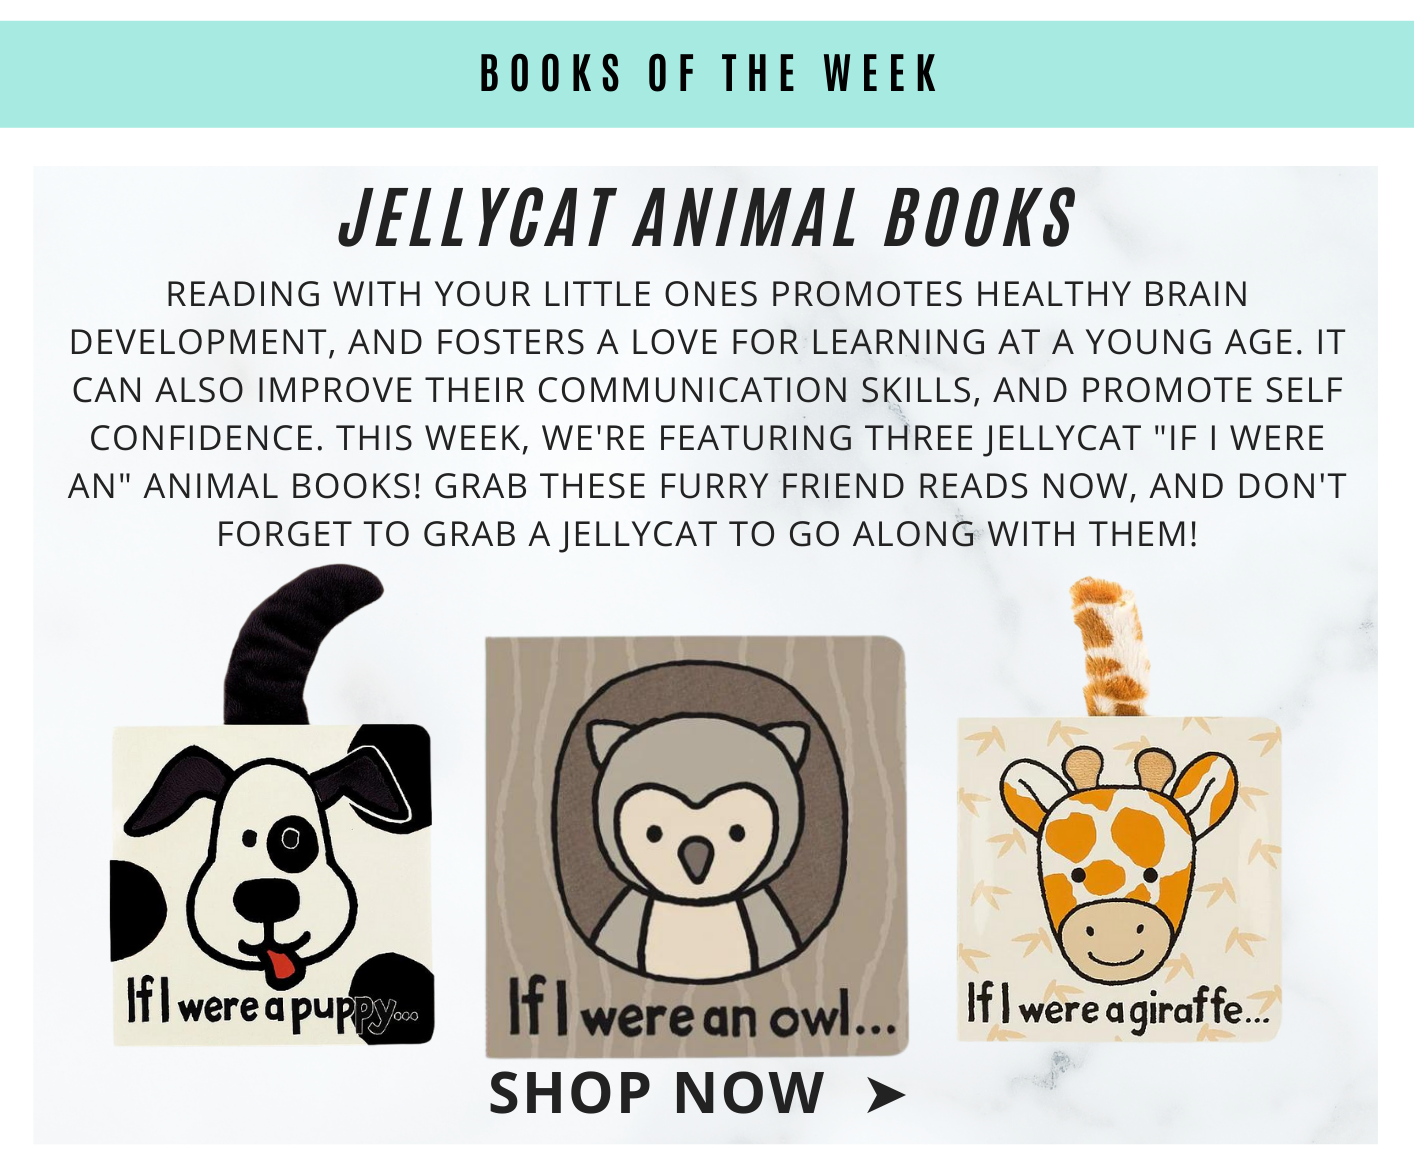 books of the week jellycat animals